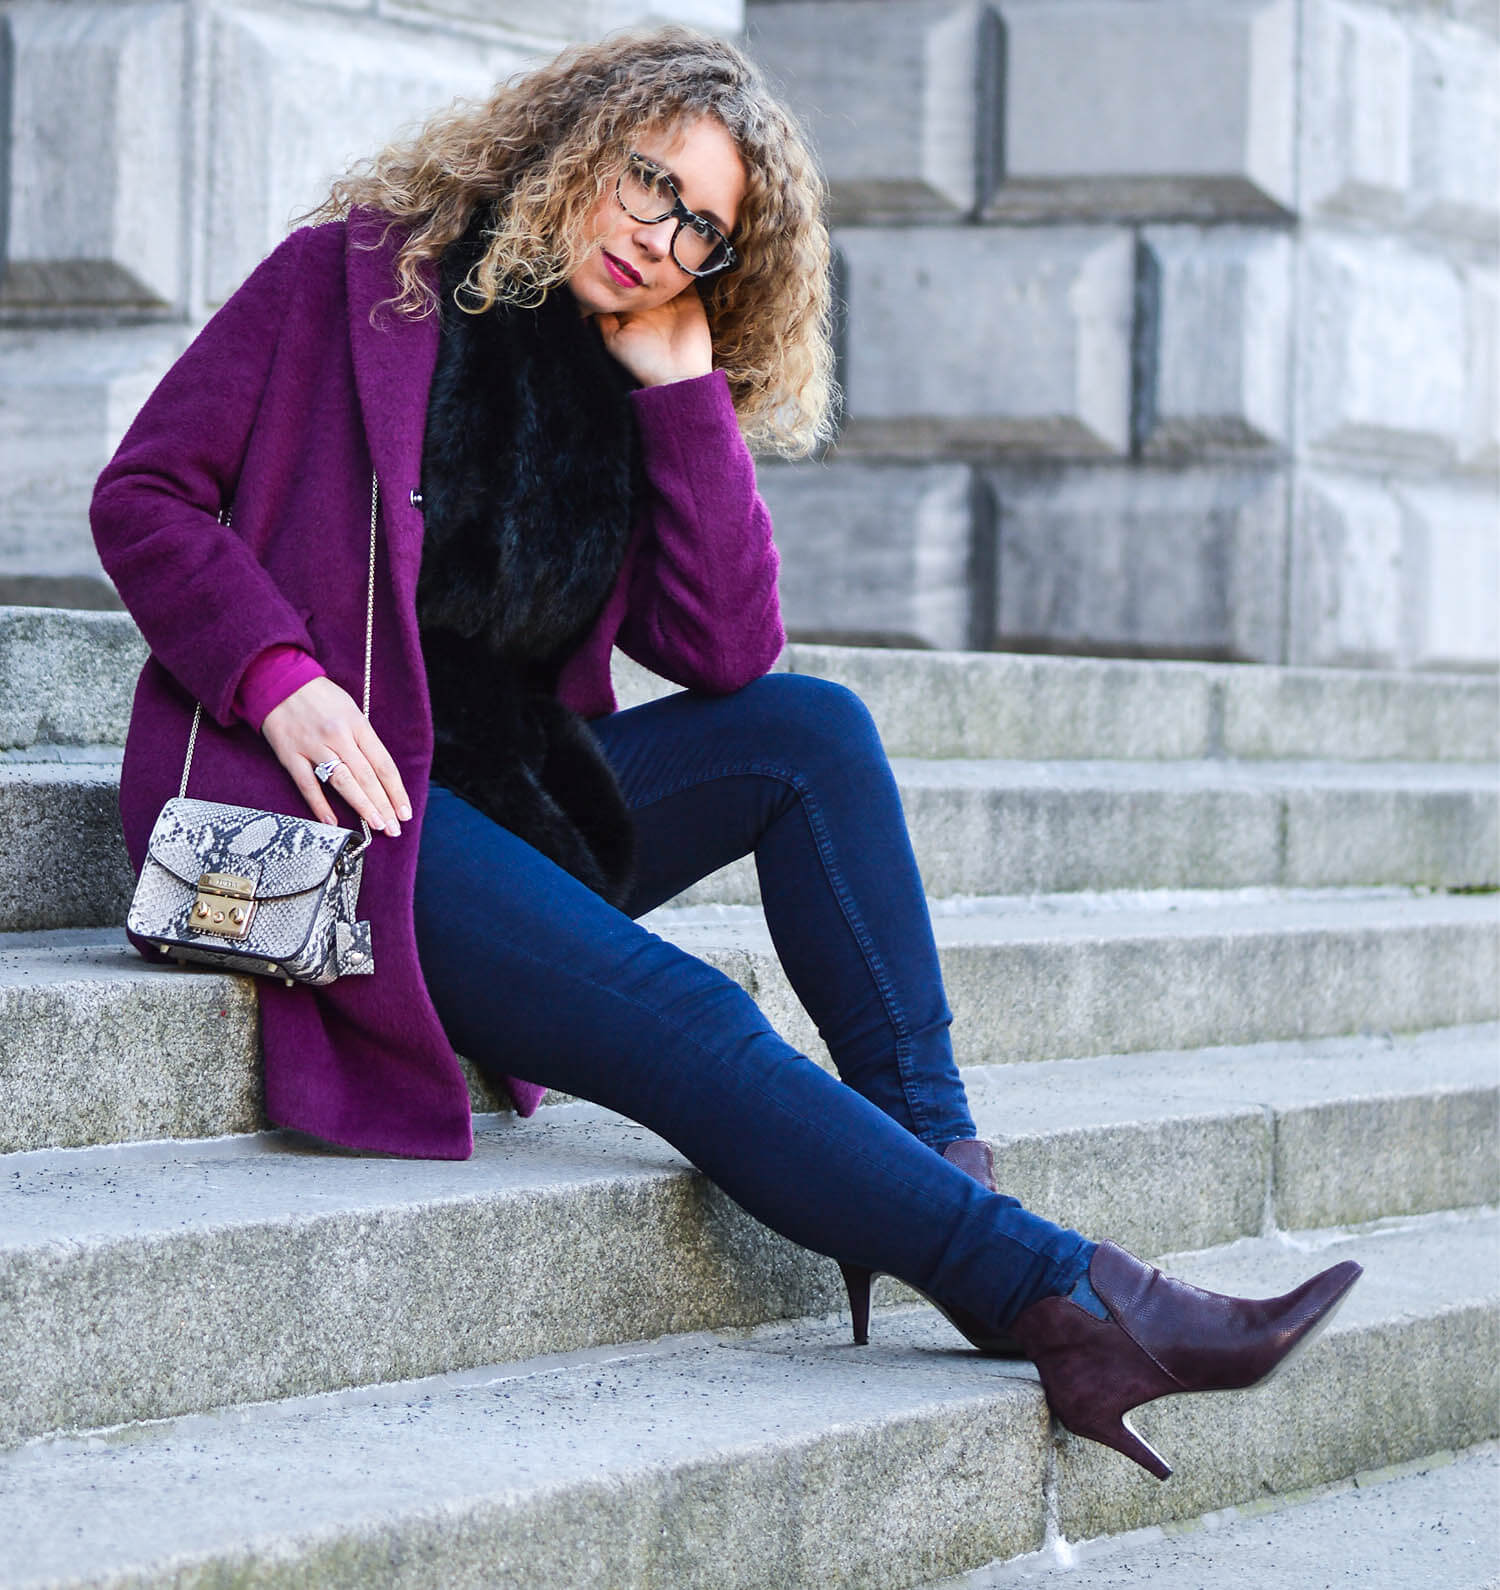 Kationette-fashionblog-Outfit-streetstyle-FakeFur-woolCoat-Furla-ankleBooties-curls